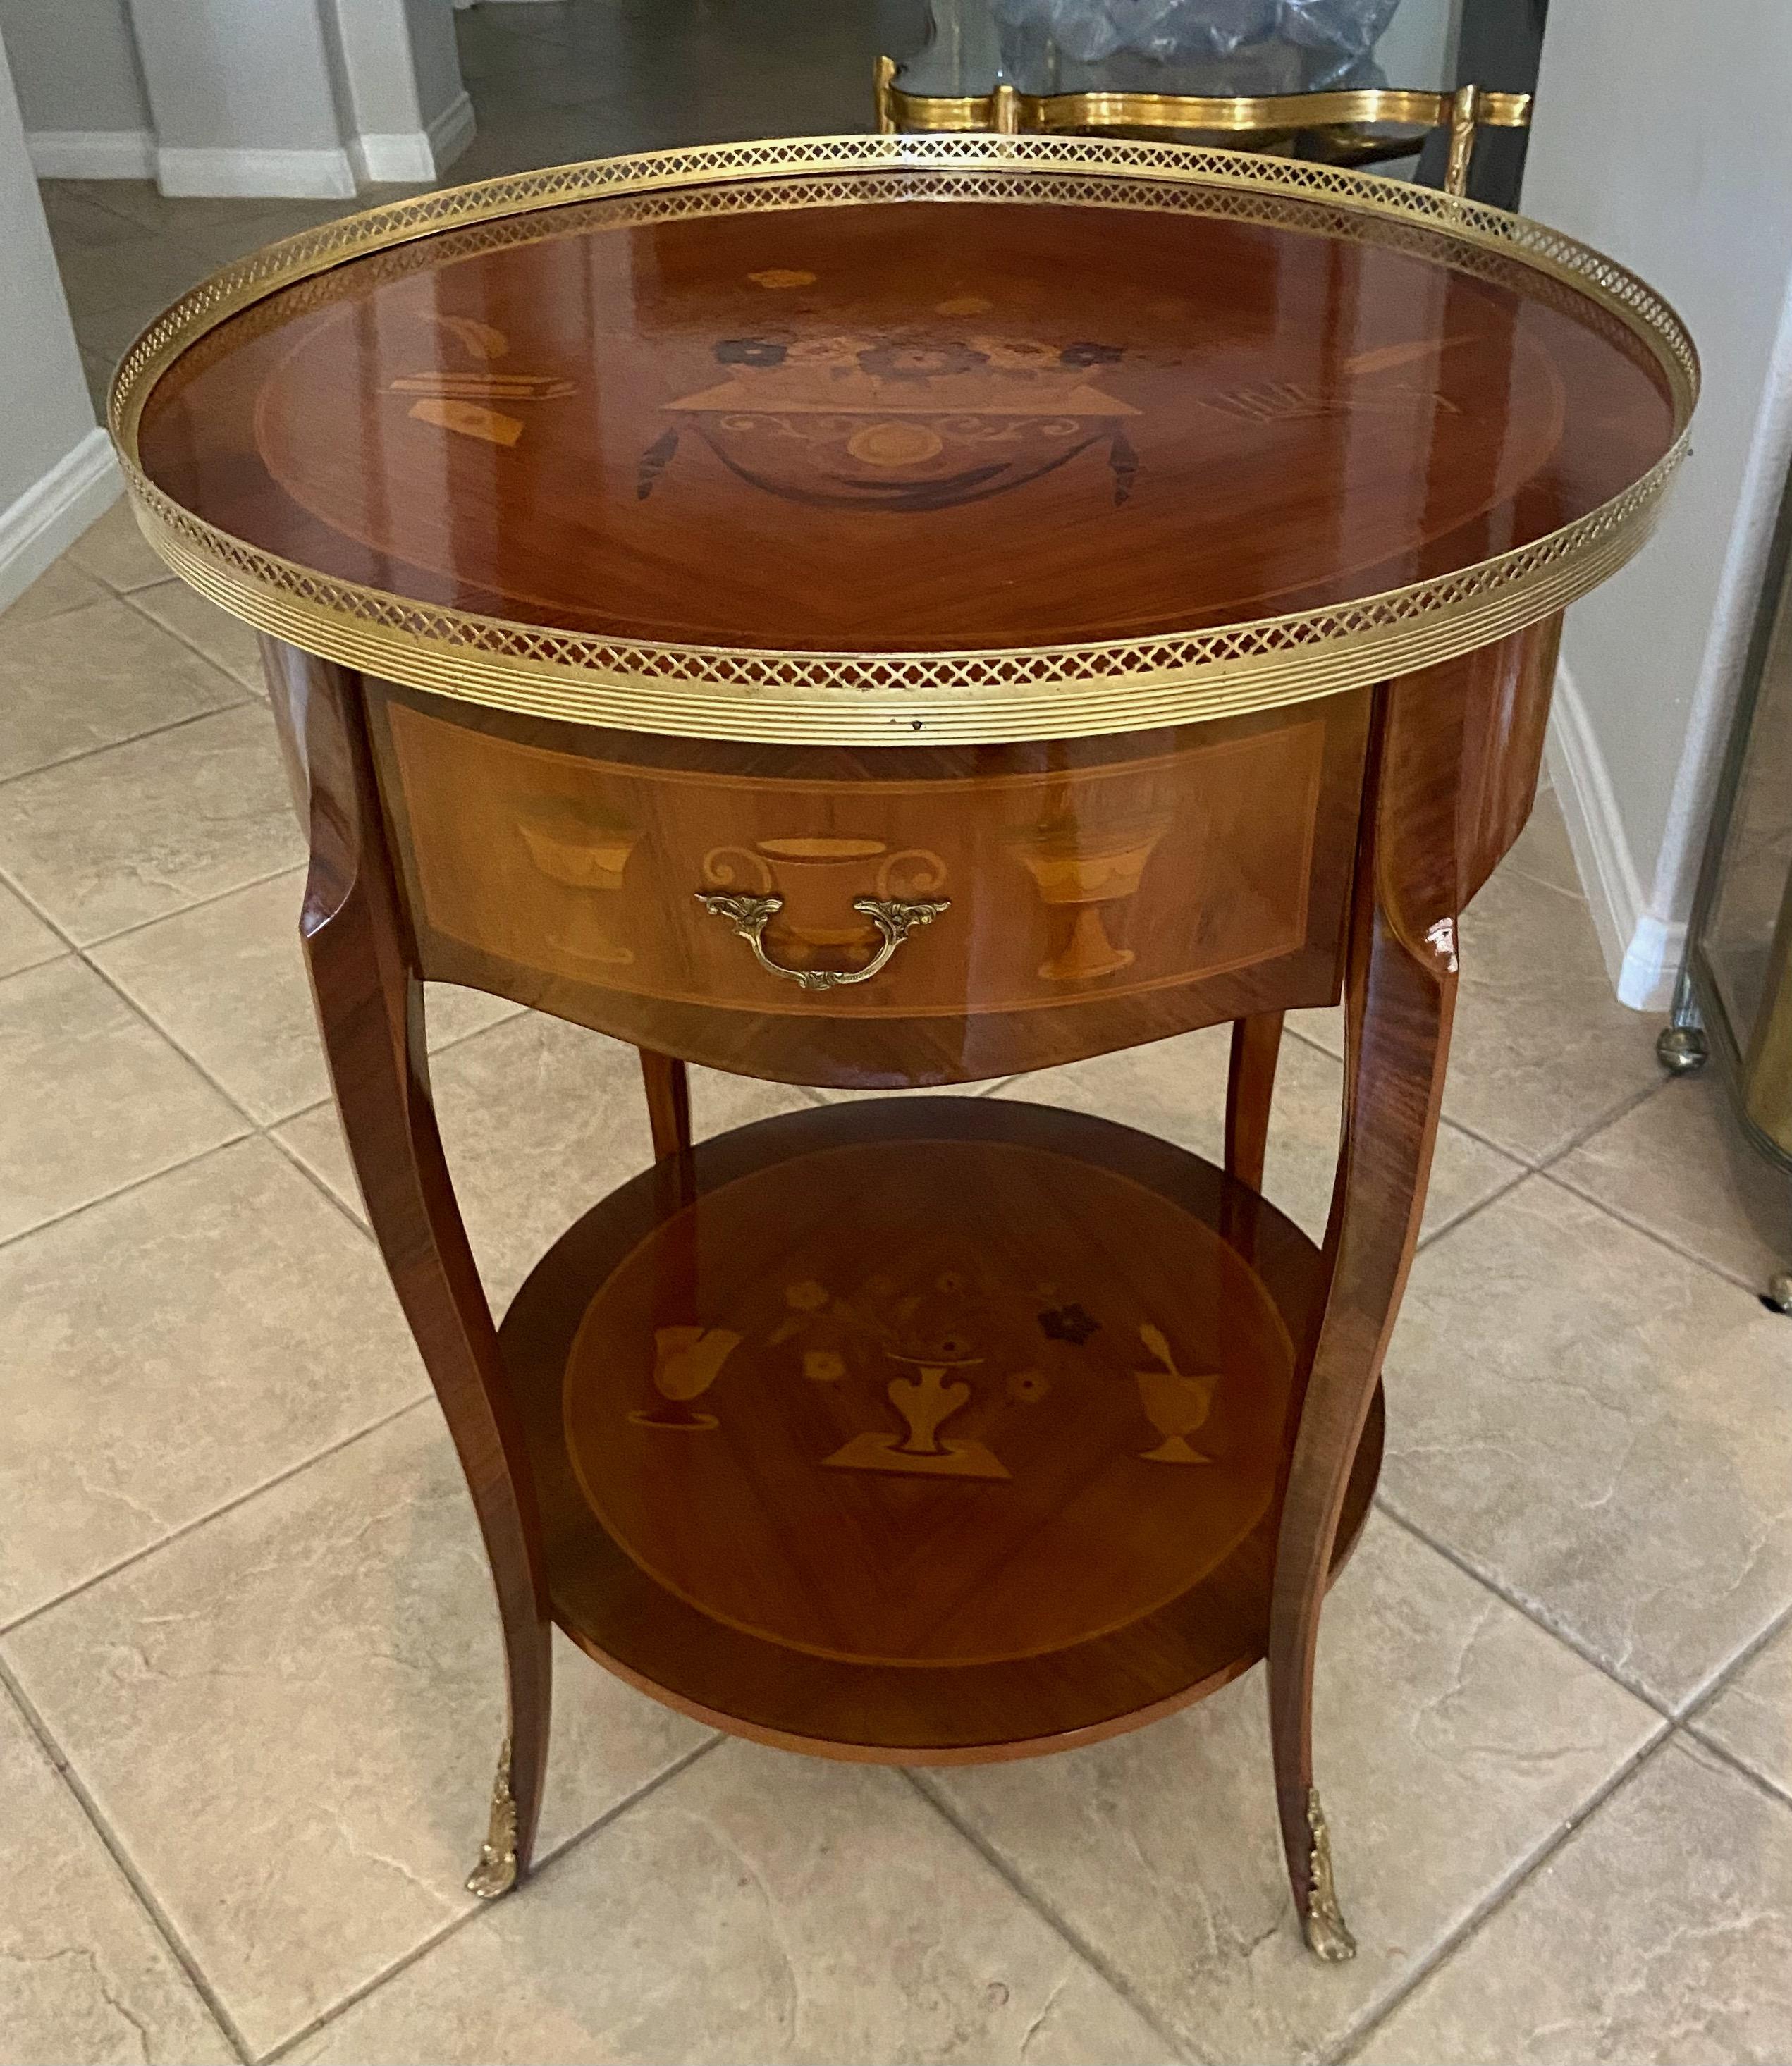 French Louis XV style 2 tier wood inlayed marquetry round side or end table. Lots of inlaid floral and urn motif throughout accentuated with brass pierced gallery rail and ormolu feet. Stamped made in Italian inside pull out drawer.